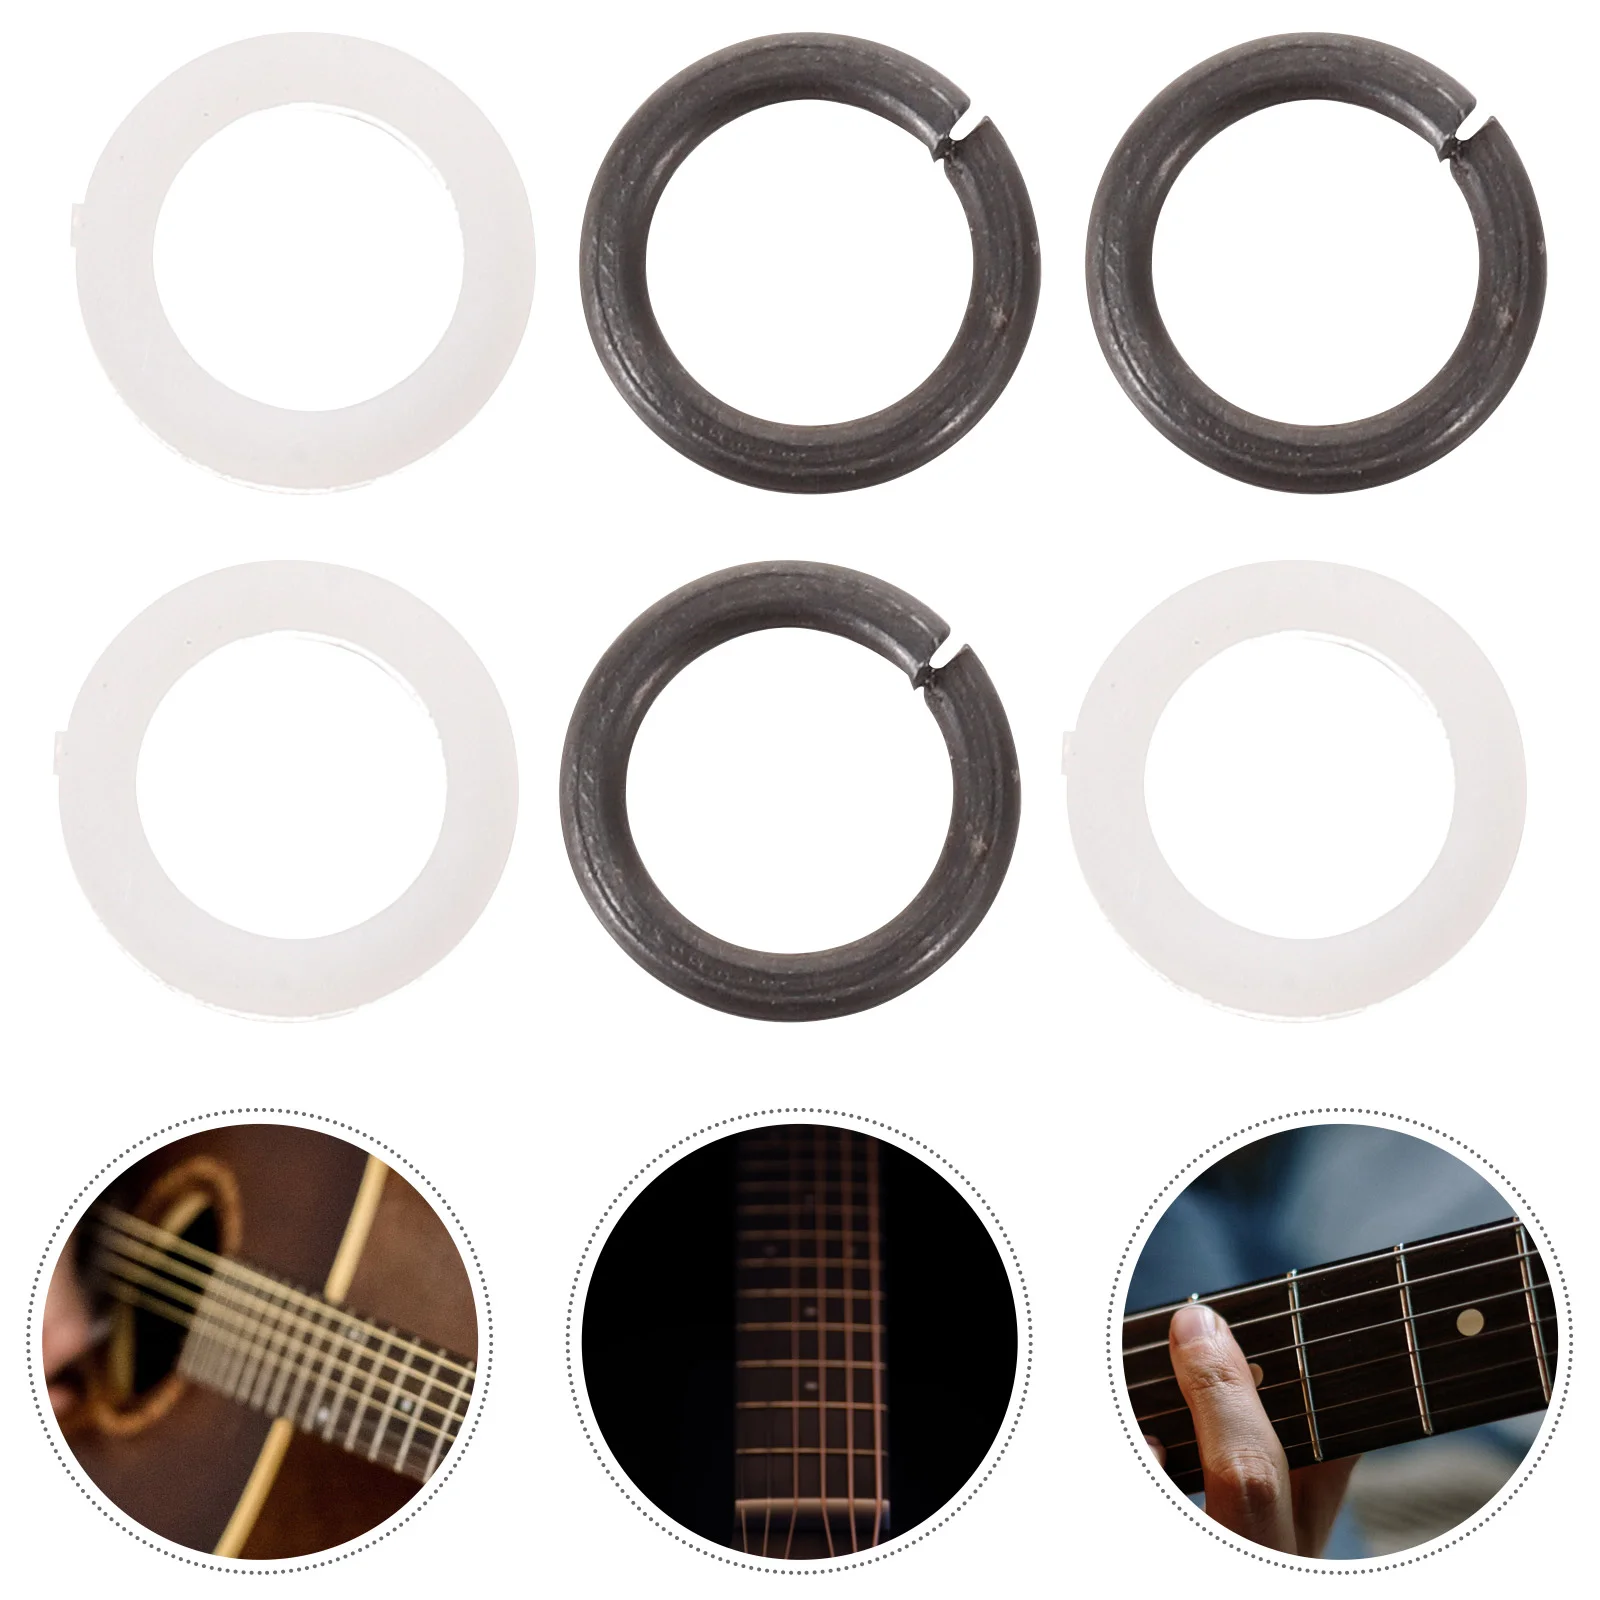 

10 Pairs Guitar Tuning Peg Washer Guitar Peg Spacer Washers Tuning Spacers Tuner Replaceable Small Gasket Plastic